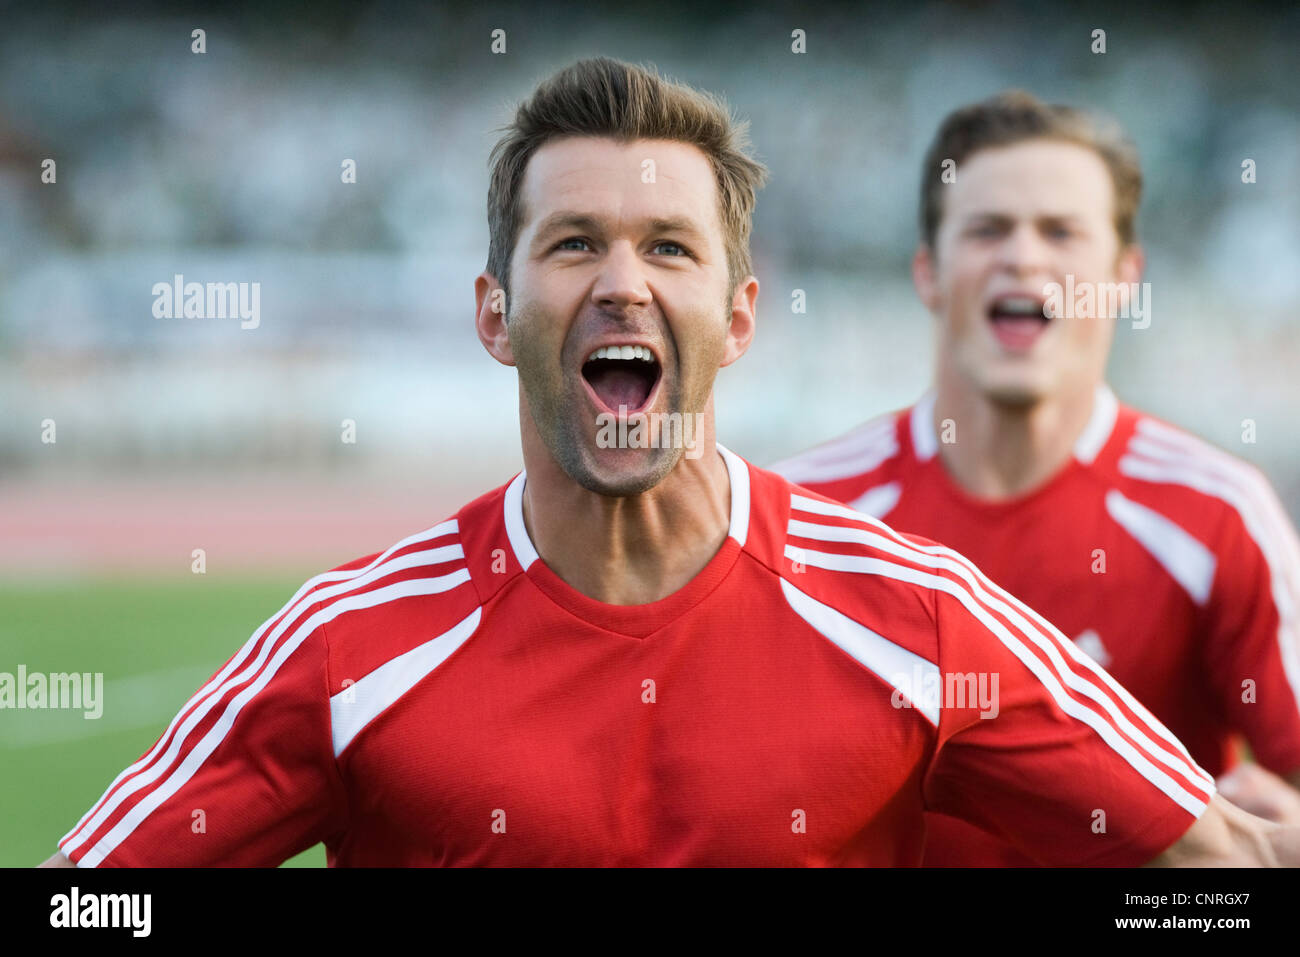 Soccer players cheering Stock Photo